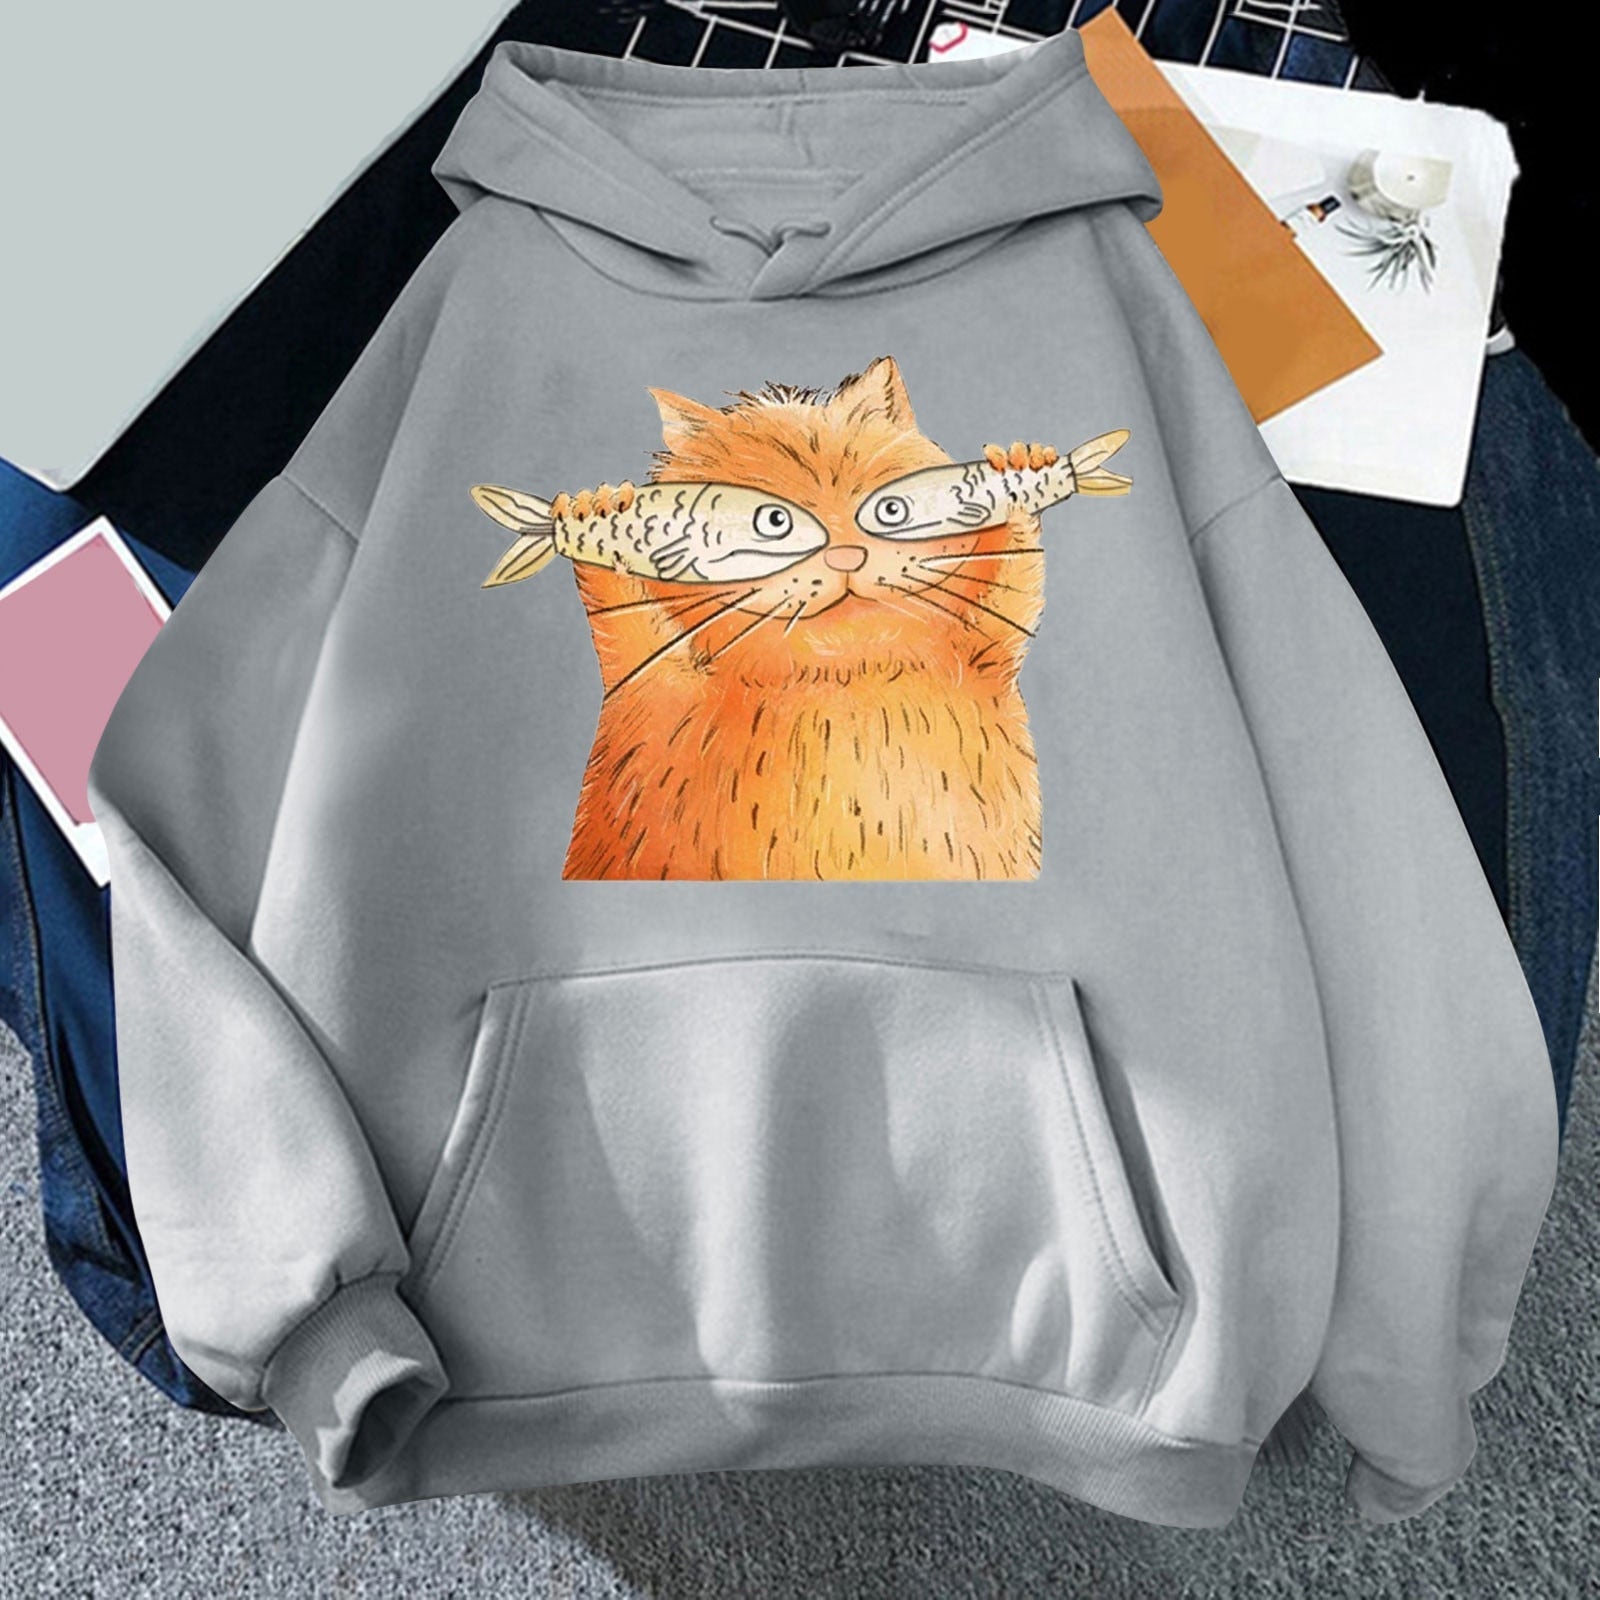 gray hoodie featuring a cartoon drawing  of a cat holding two fish and looking adorable